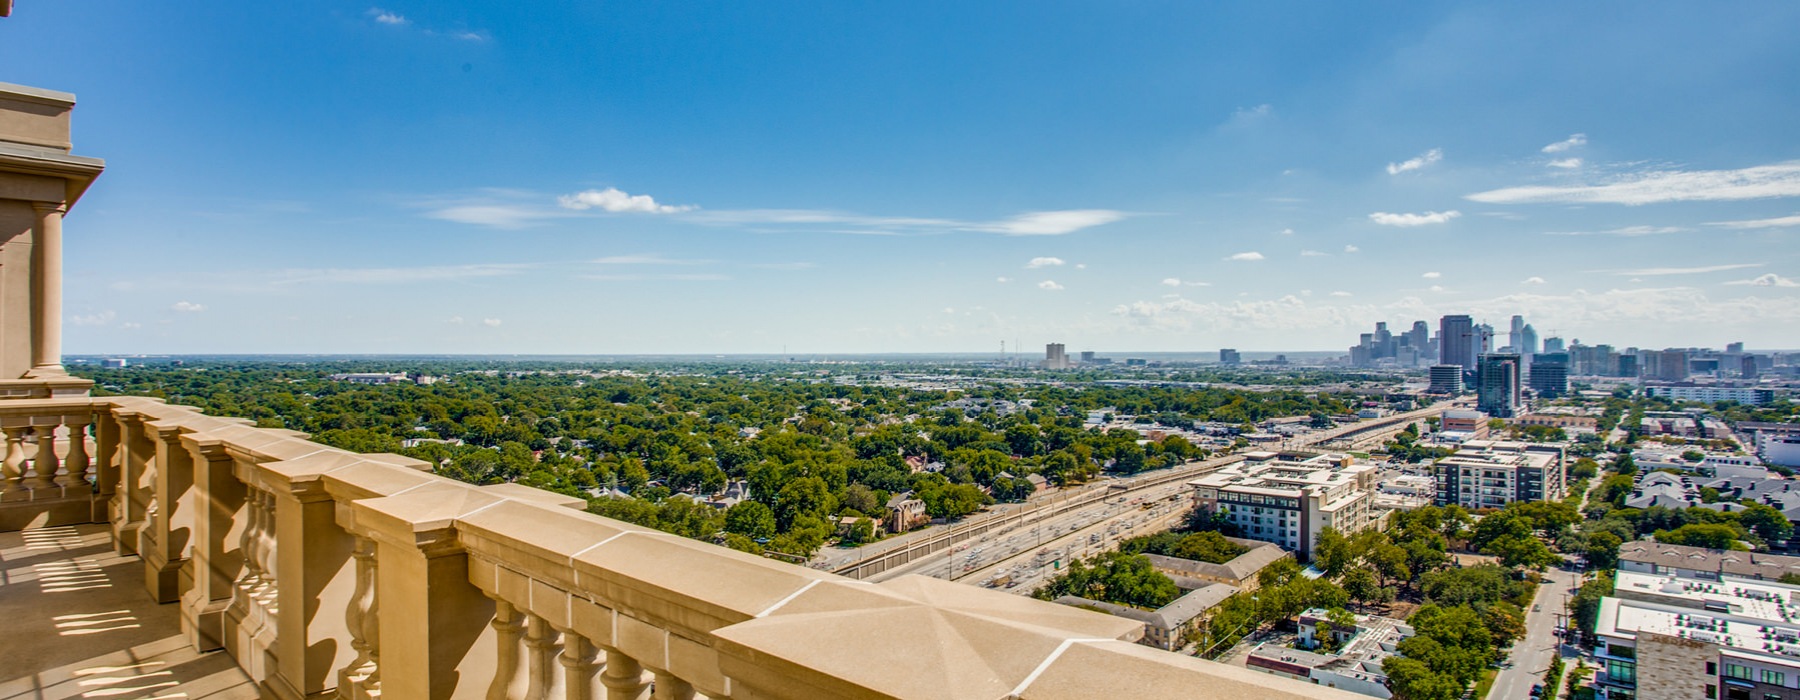 Private terrace oversees downtown Dallas